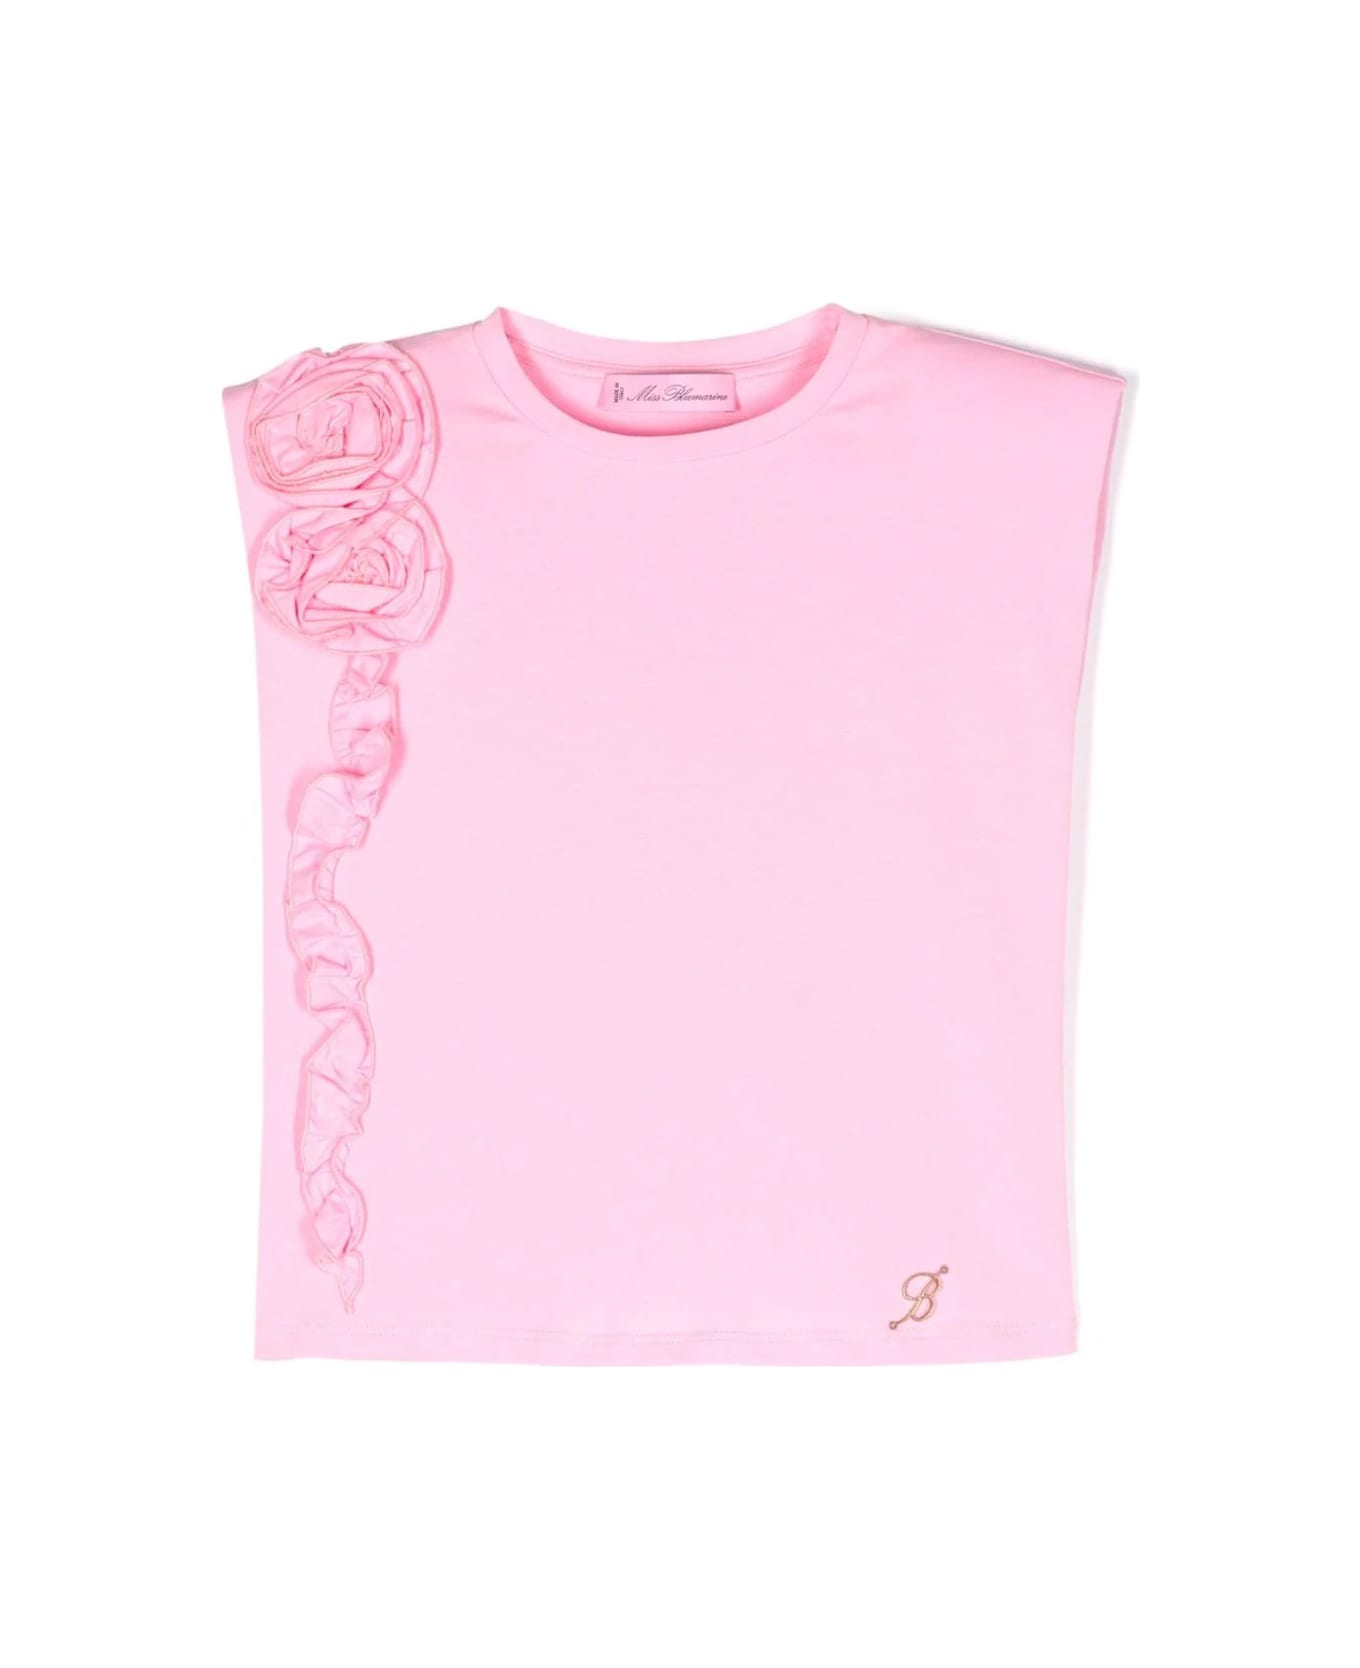 Miss Blumarine Pink T-shirt With Flowers And Ruffles - Pink